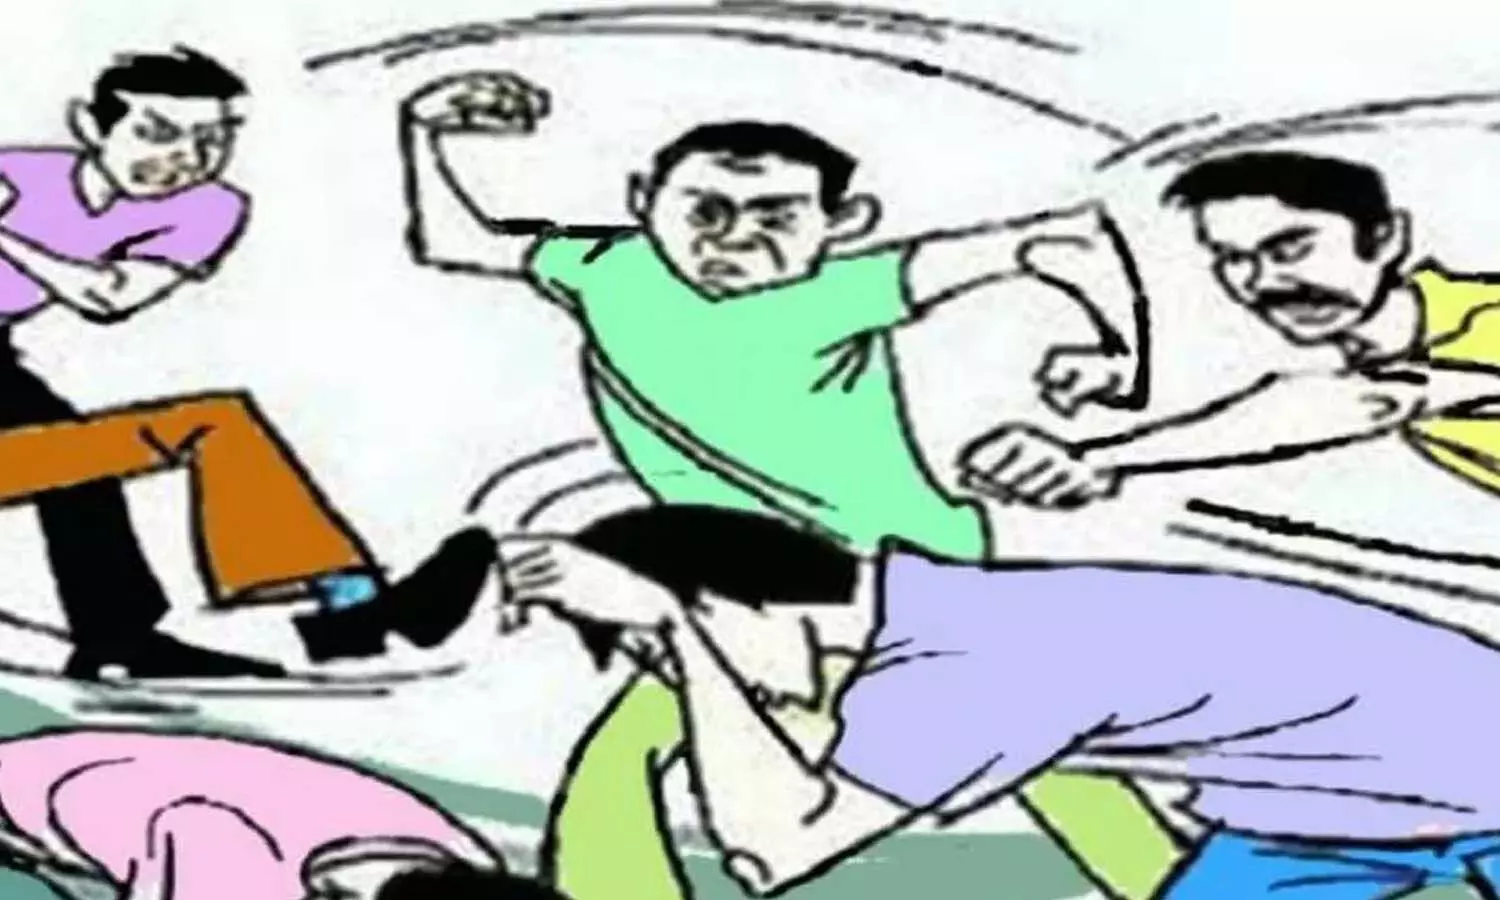 In Bhadohi, masked men chased and beat a student inside the college